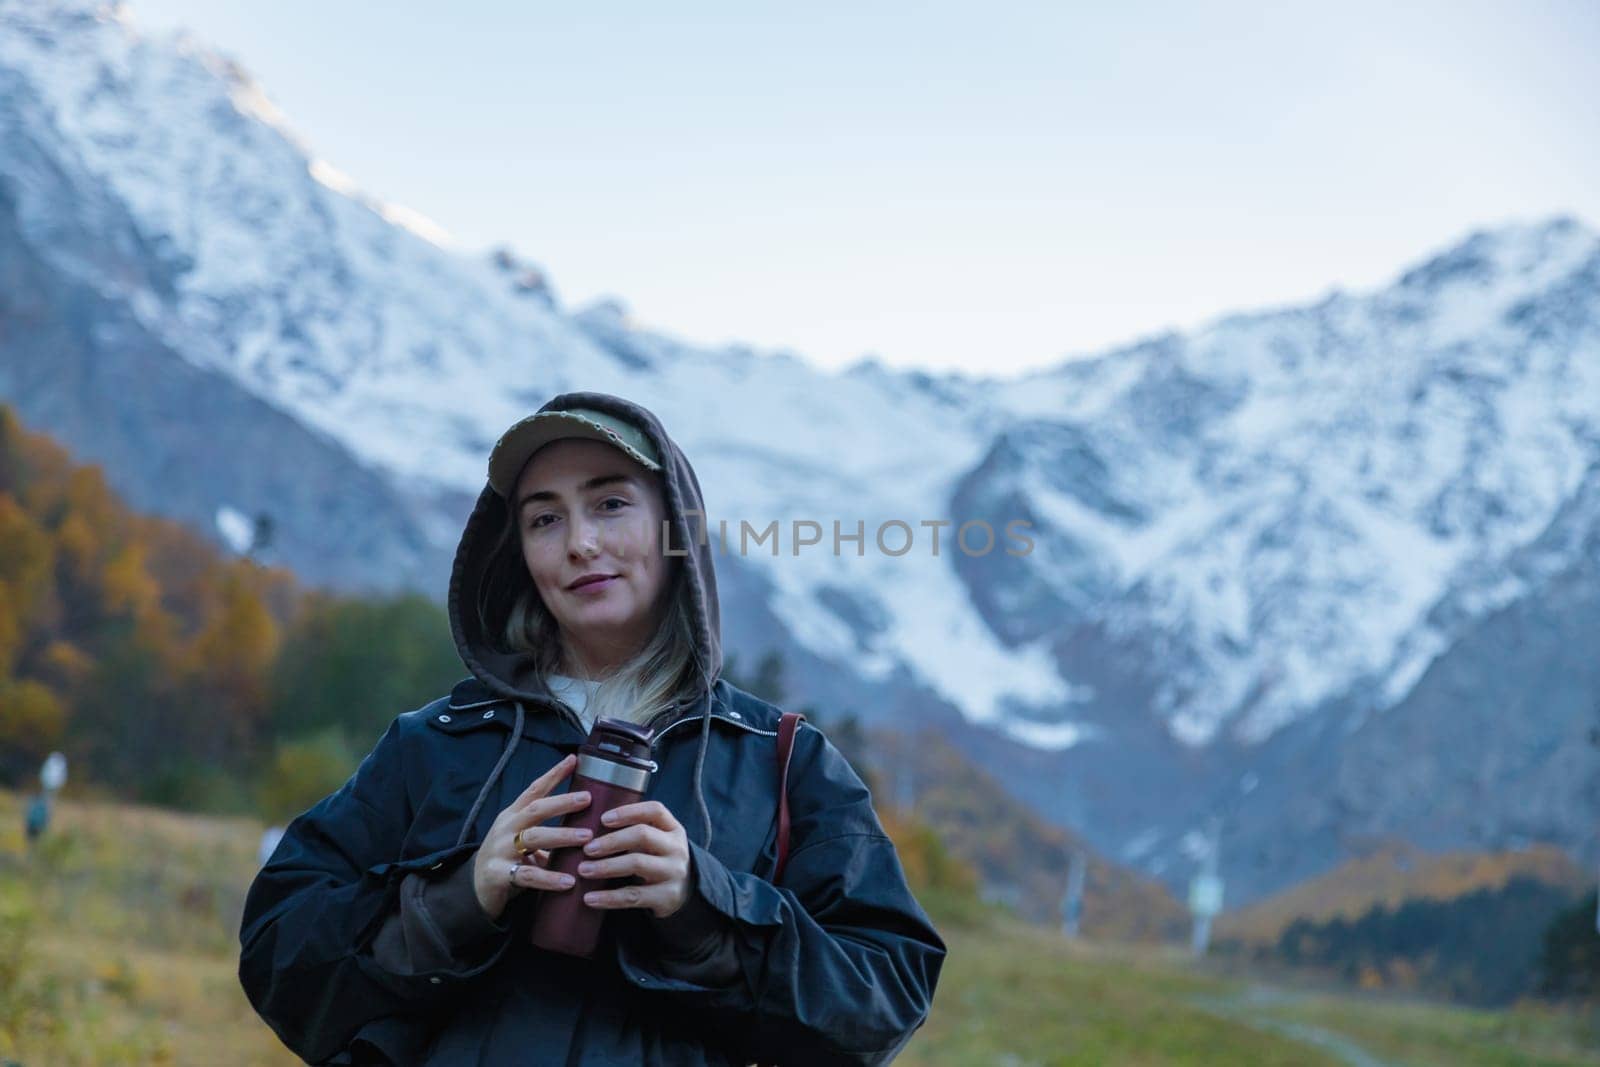 Girl with a thermos on the background of a glacier drinking coffee in the mountains by Yurich32